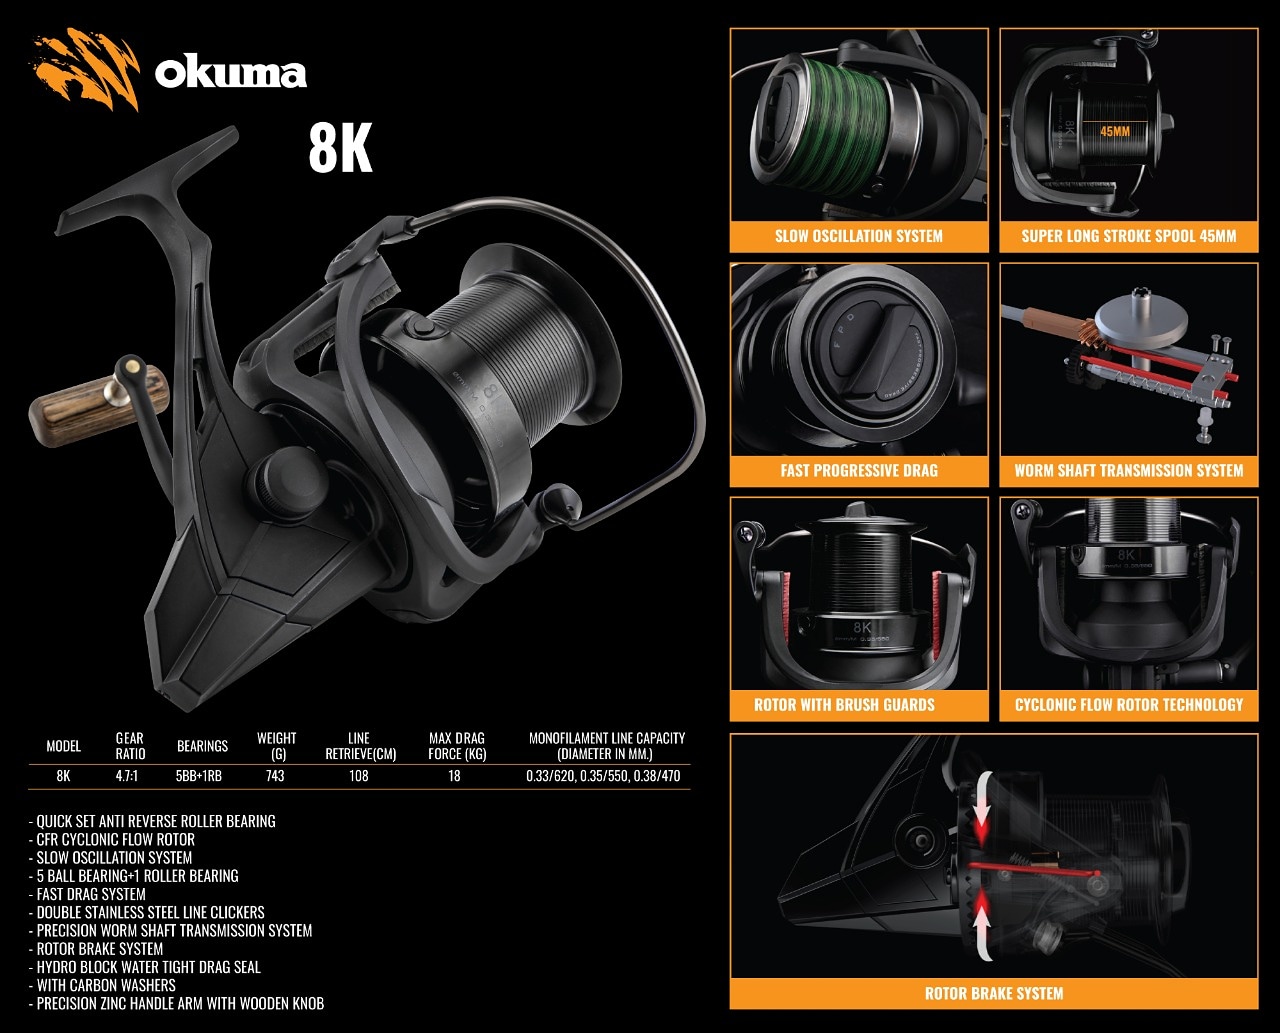 Sollys Anglers Nsp on X: Okuma has done it agian, Introducing the Okuma 8K  surf reel. As always Okuma brings you top quality products at a reasonably  price point. #saltwaterfishing #anglerslife #Fishing #